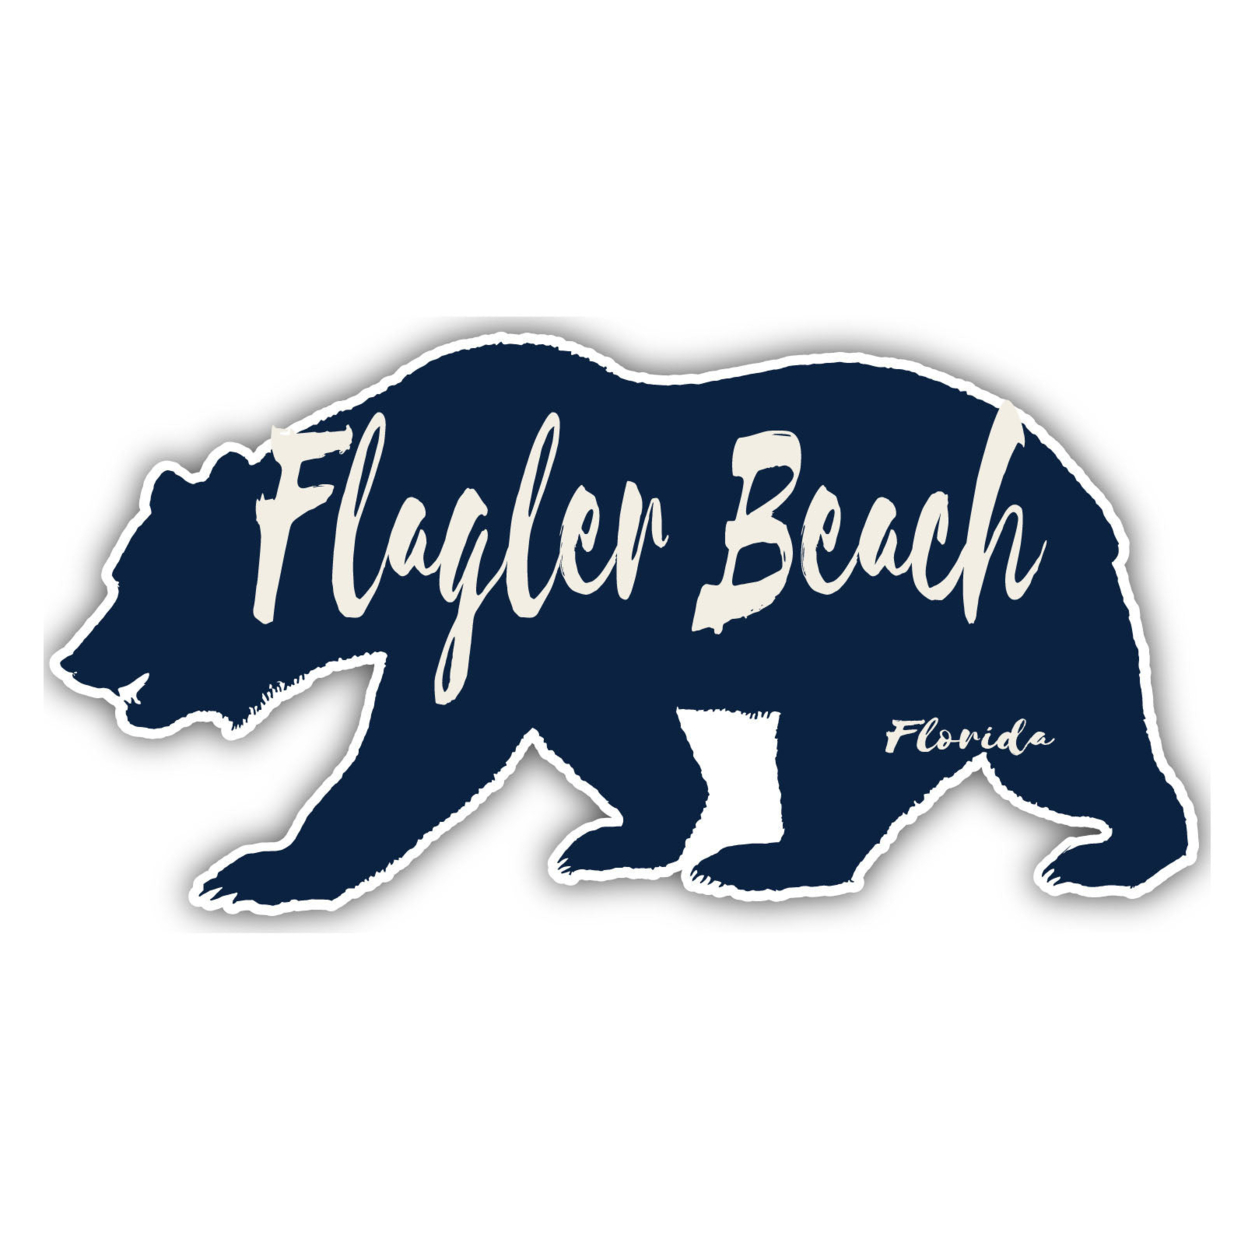 Flagler Beach Florida Souvenir Decorative Stickers (Choose Theme And Size) - 4-Pack, 12-Inch, Camp Life